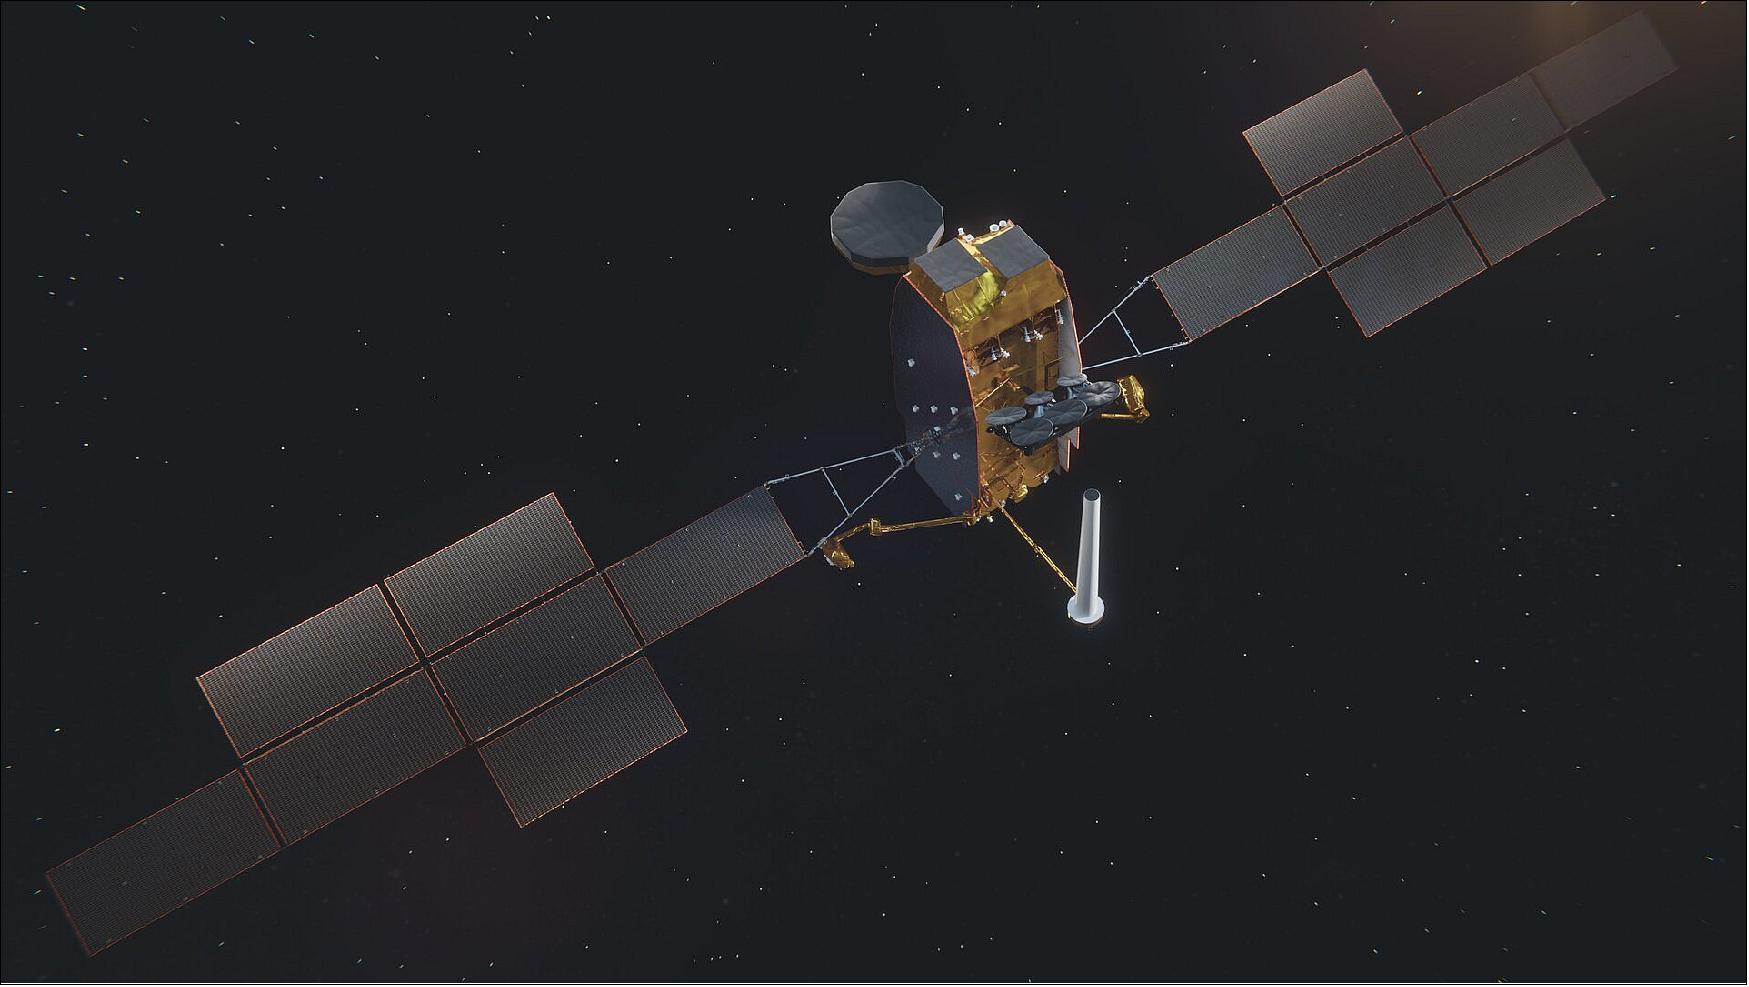 Figure 2: Artists impression of a telecommunications satellite developed under the SpainSat Next Generation programme. Two telecommunications satellites that can be reprogrammed while in space to respond to changing demands on Earth have passed their critical design reviews. The satellites – which are being developed and built by satellite manufacturers Airbus and Thales Alenia Space for satellite operator Hisdesat in Spain – are due to launch in 2023 and 2024. They will provide secure communications using innovative technologies such as fully reconfigurable active antennas with beam hopping and geolocation capabilities, artificial intelligence, big data and the internet of things (image credit: ESA)